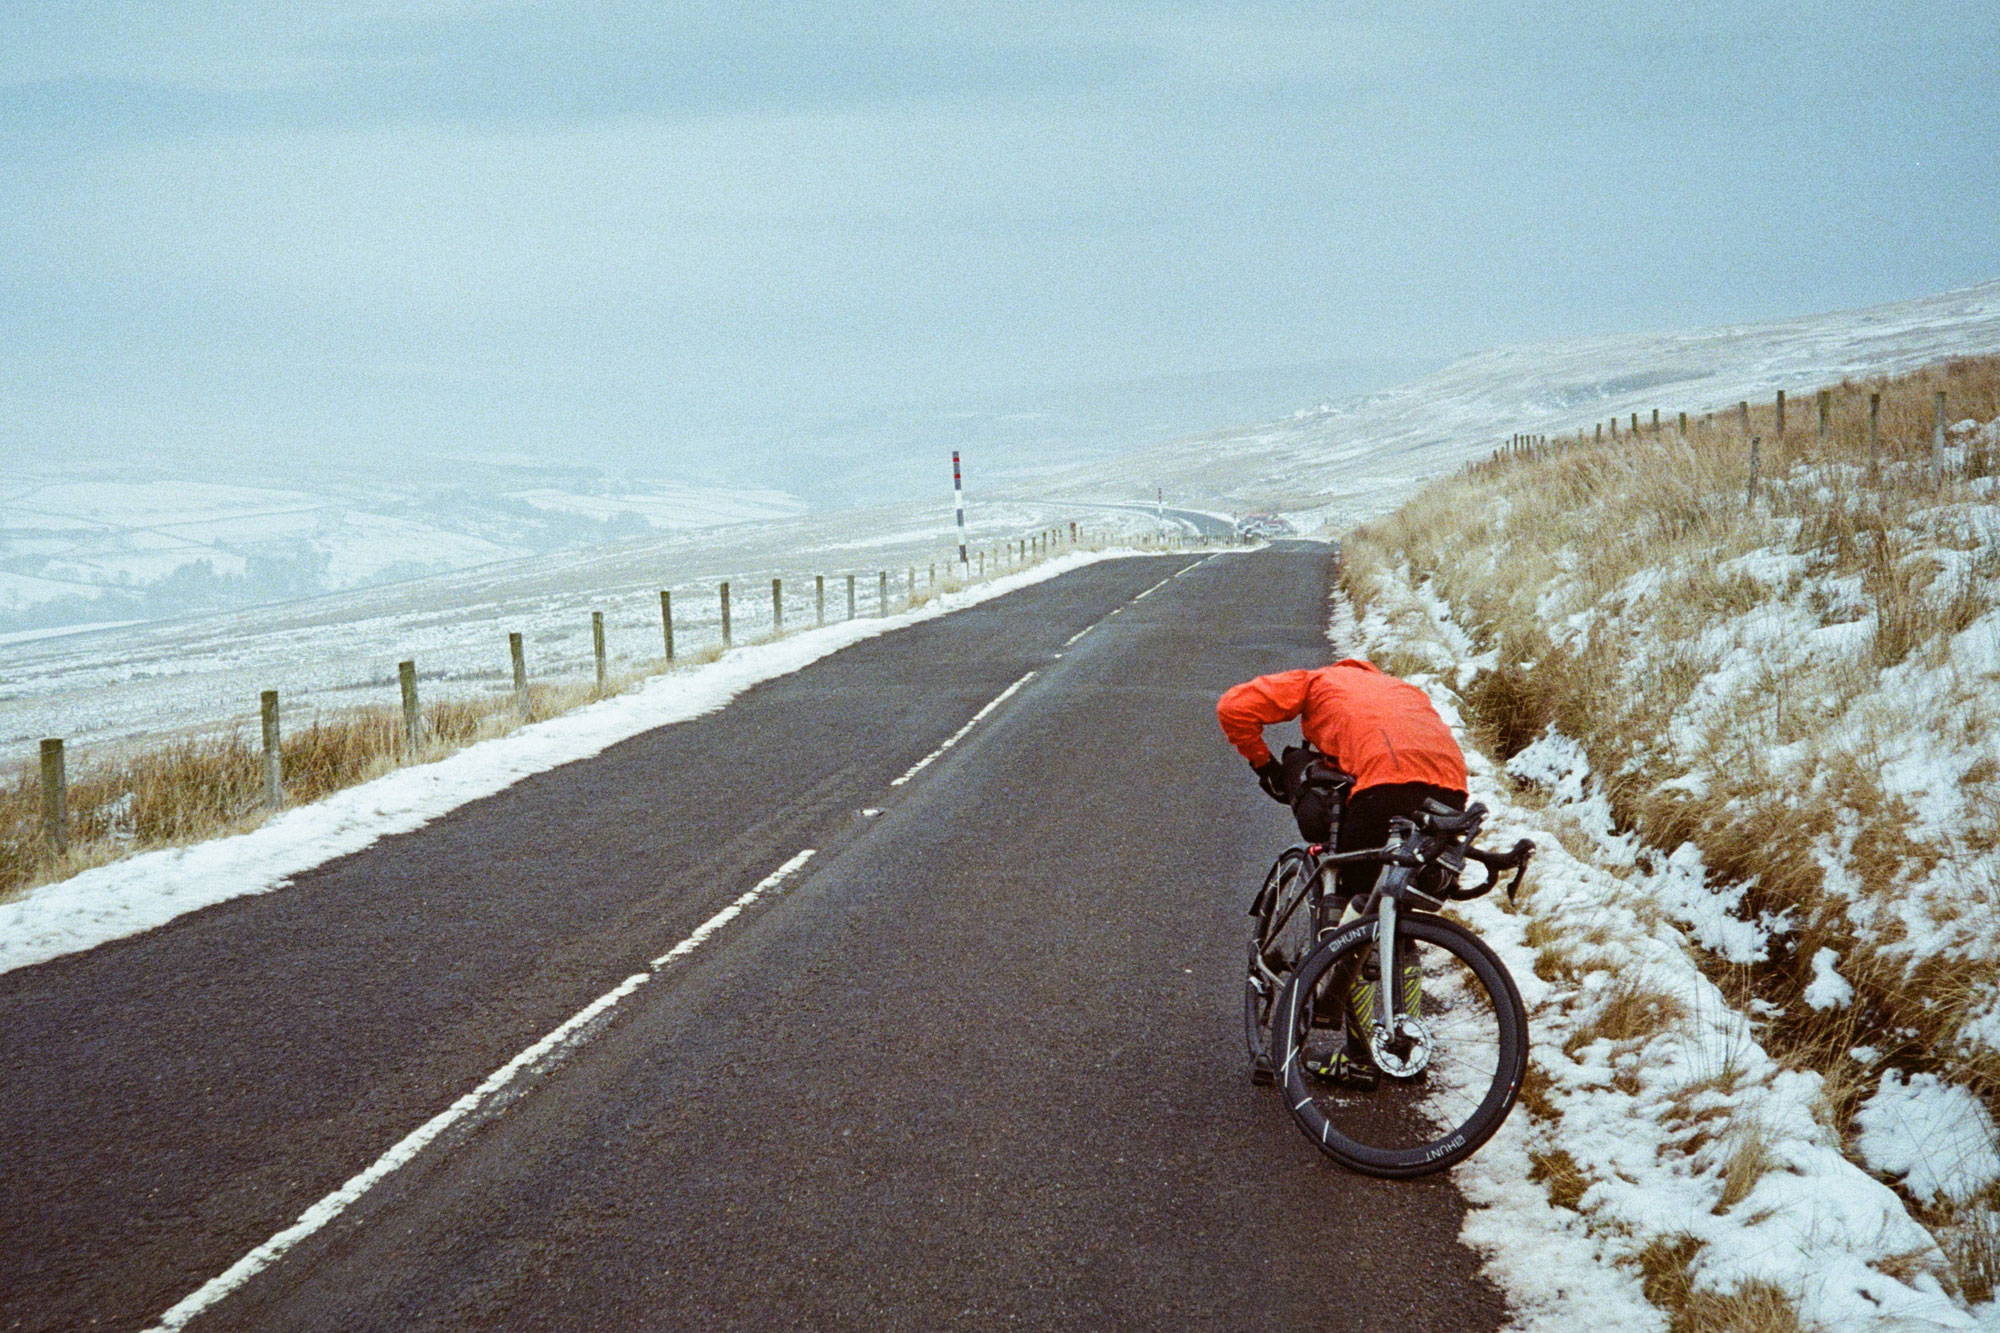 Rider by the side of the road in the snow, 48 Limitless wheels